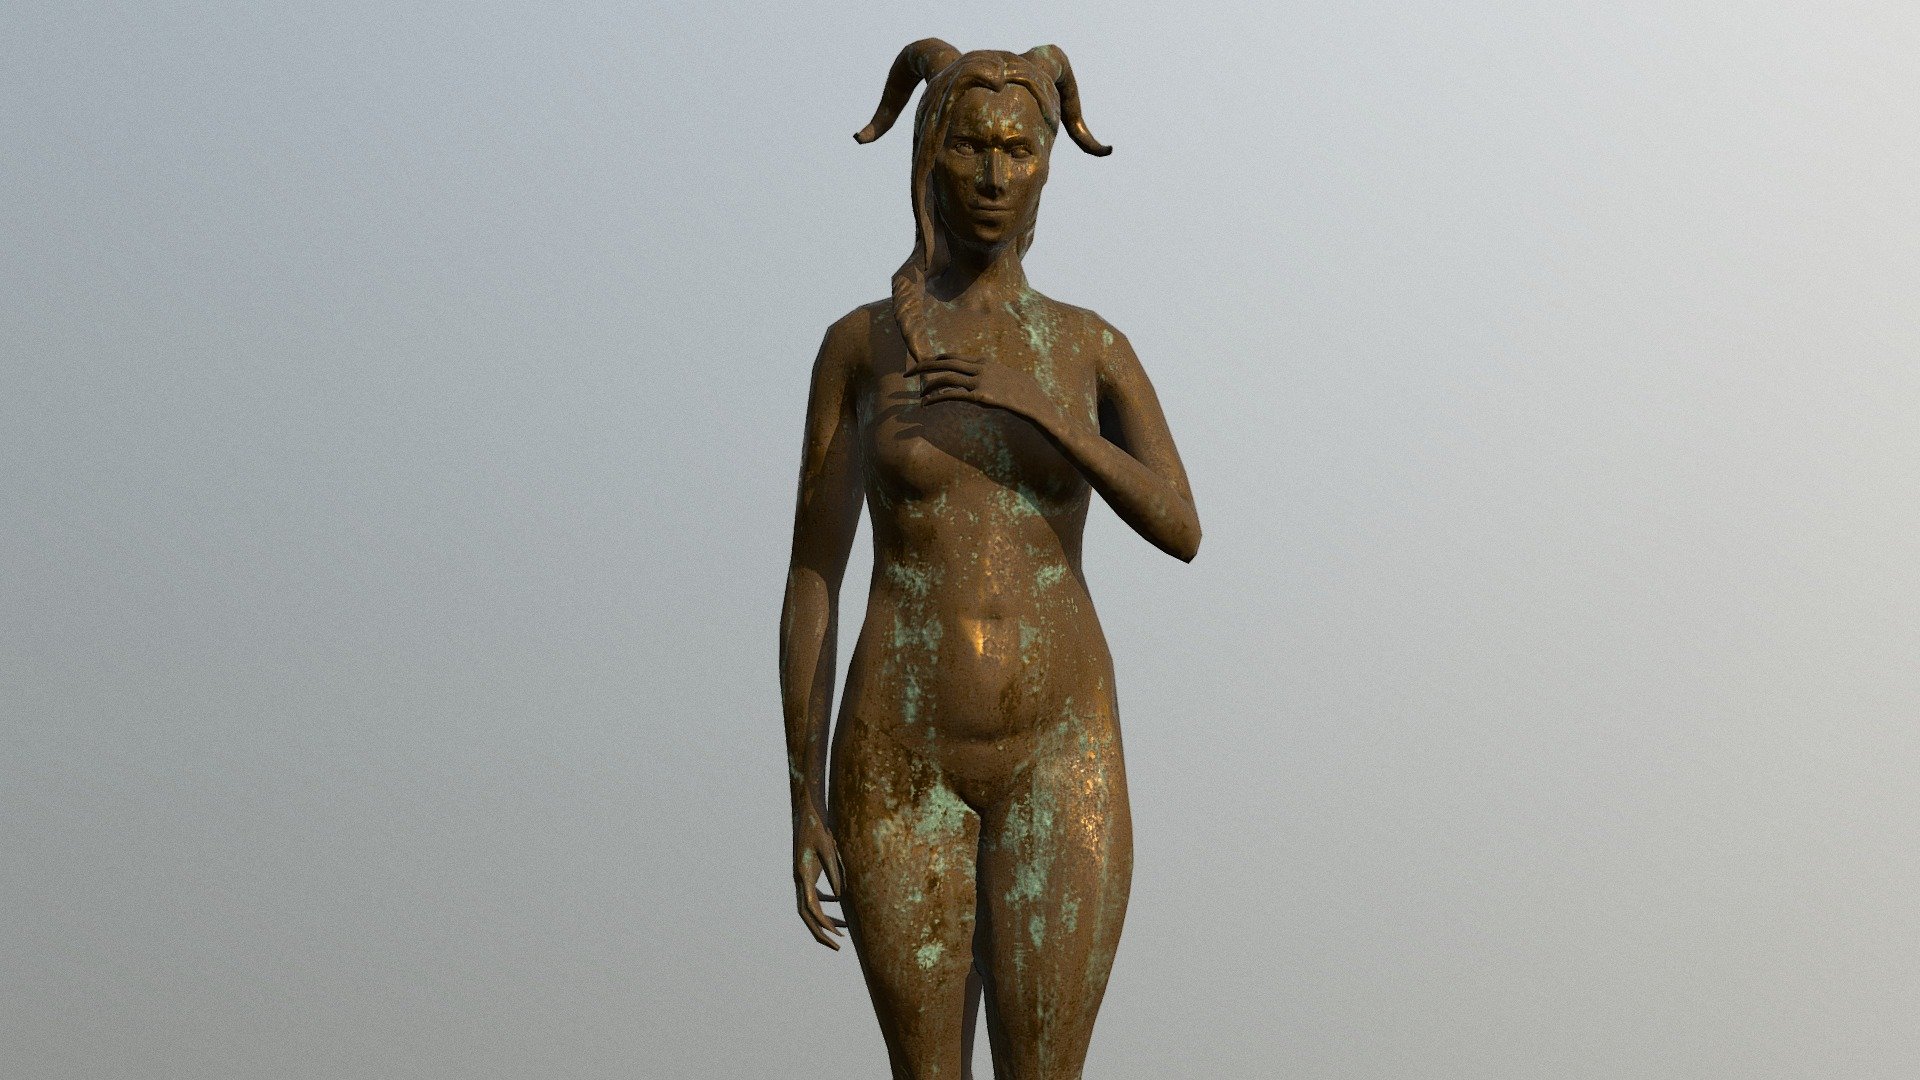 Statute Hero Piece that I completed as part of my second year Real Time Environment module - Statue of Lilith - 3D model by DJMiddi 3d model